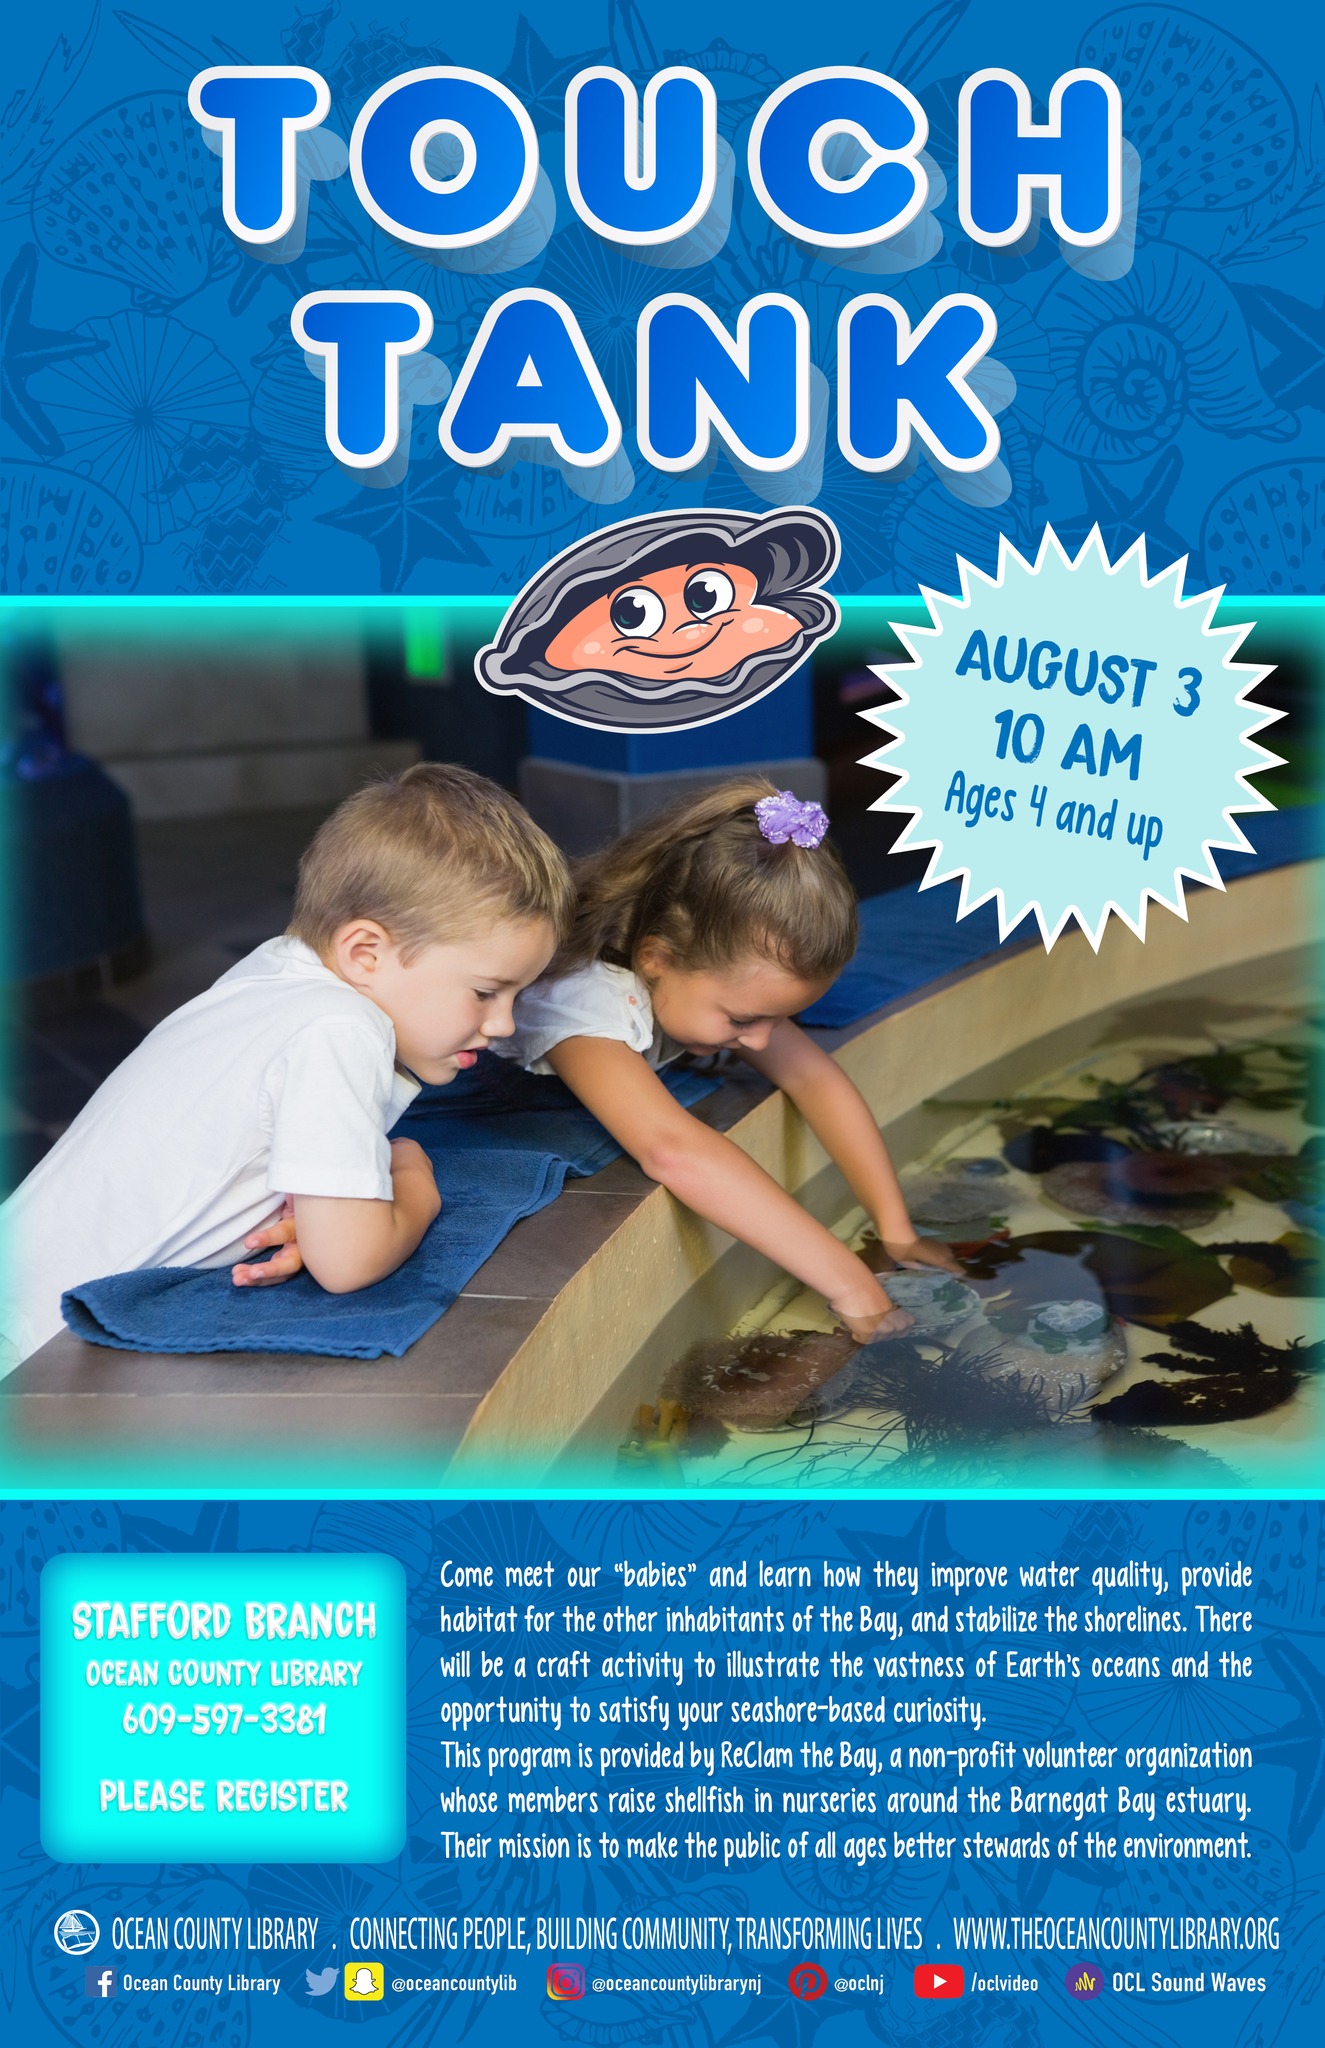 touch-tank-event-Stafford-Branch-Ocean-County-Library